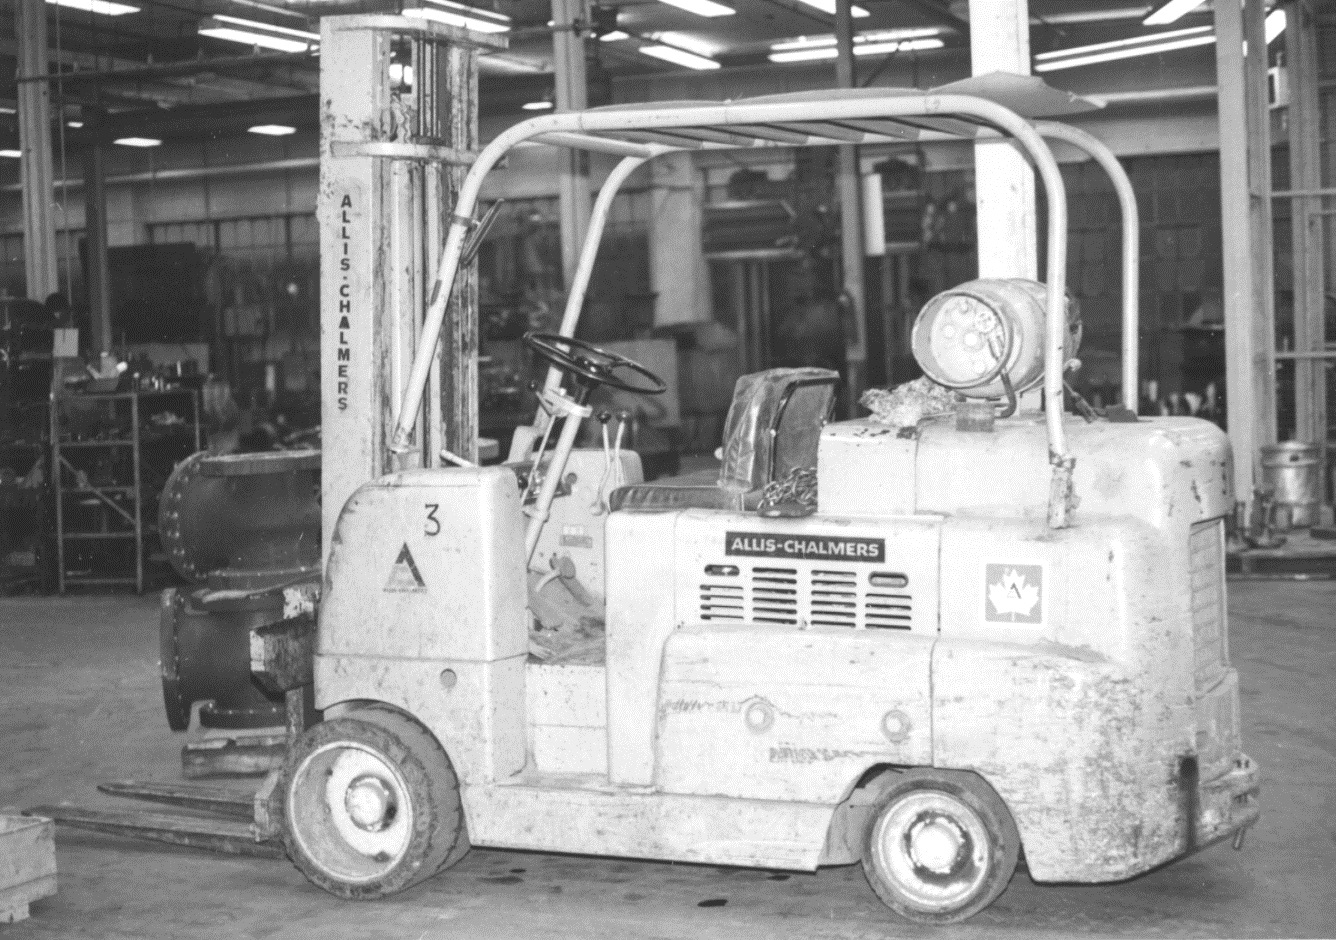 1960 Alis Chalmers propane powered forklift